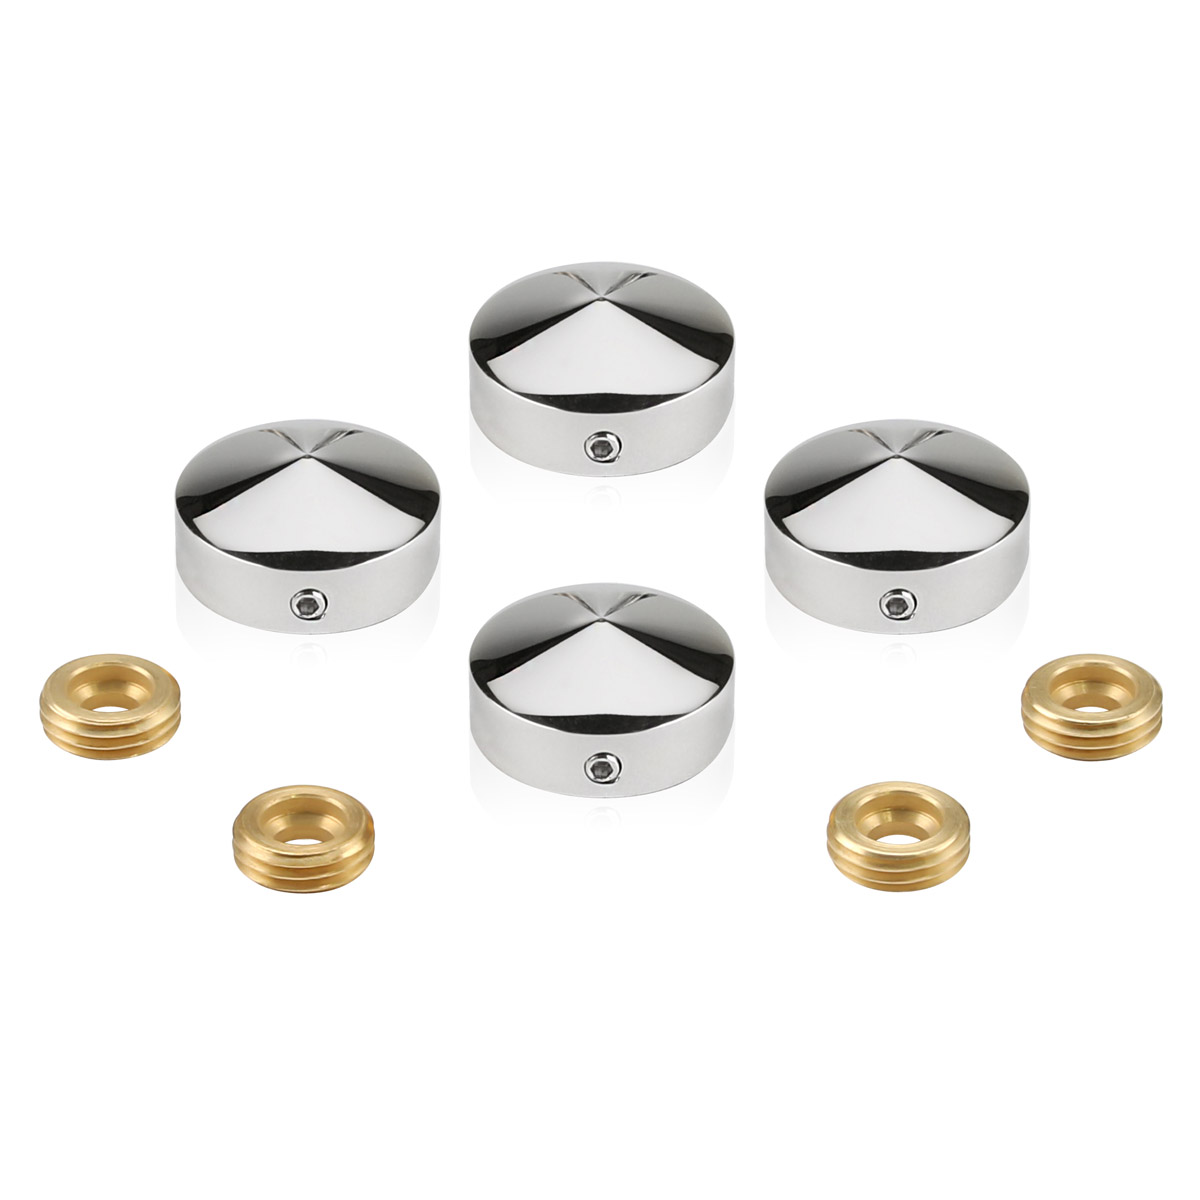 Set of 4 Conical Locking  Screw Cover Diameter 7/8'', Polished Stainless Steel Finish (Indoor or Outdoor)